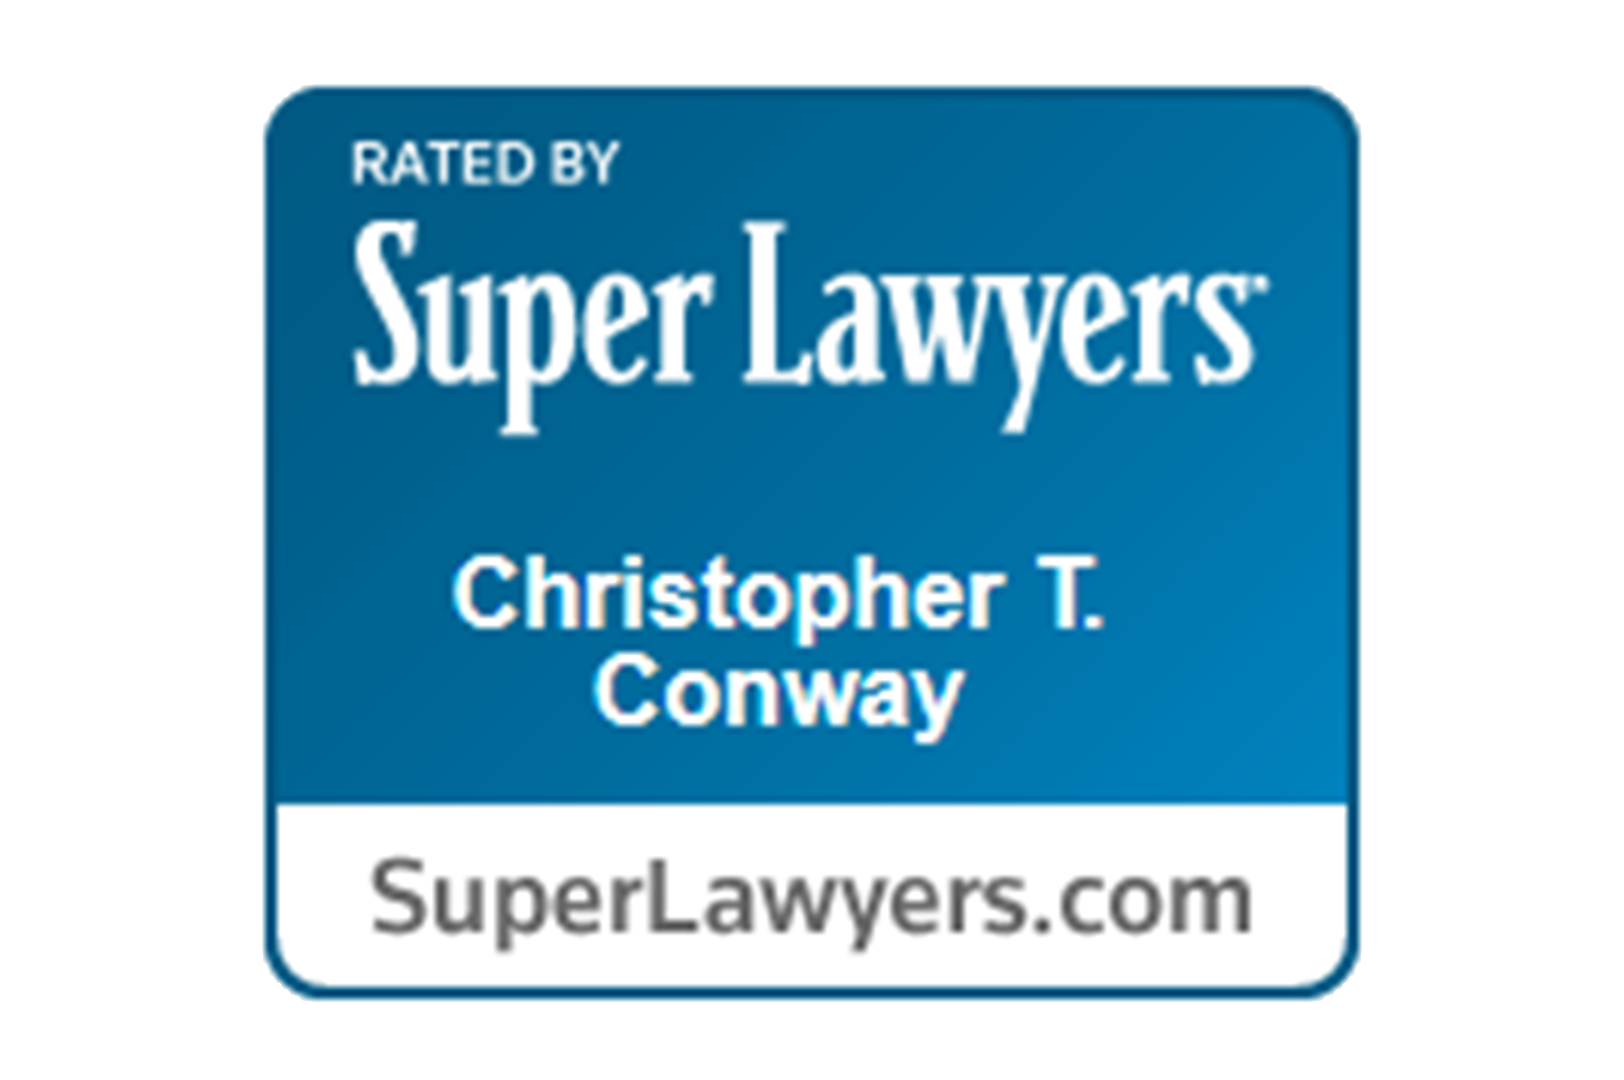 Super Lawyers Award for Christopher T. Conway 